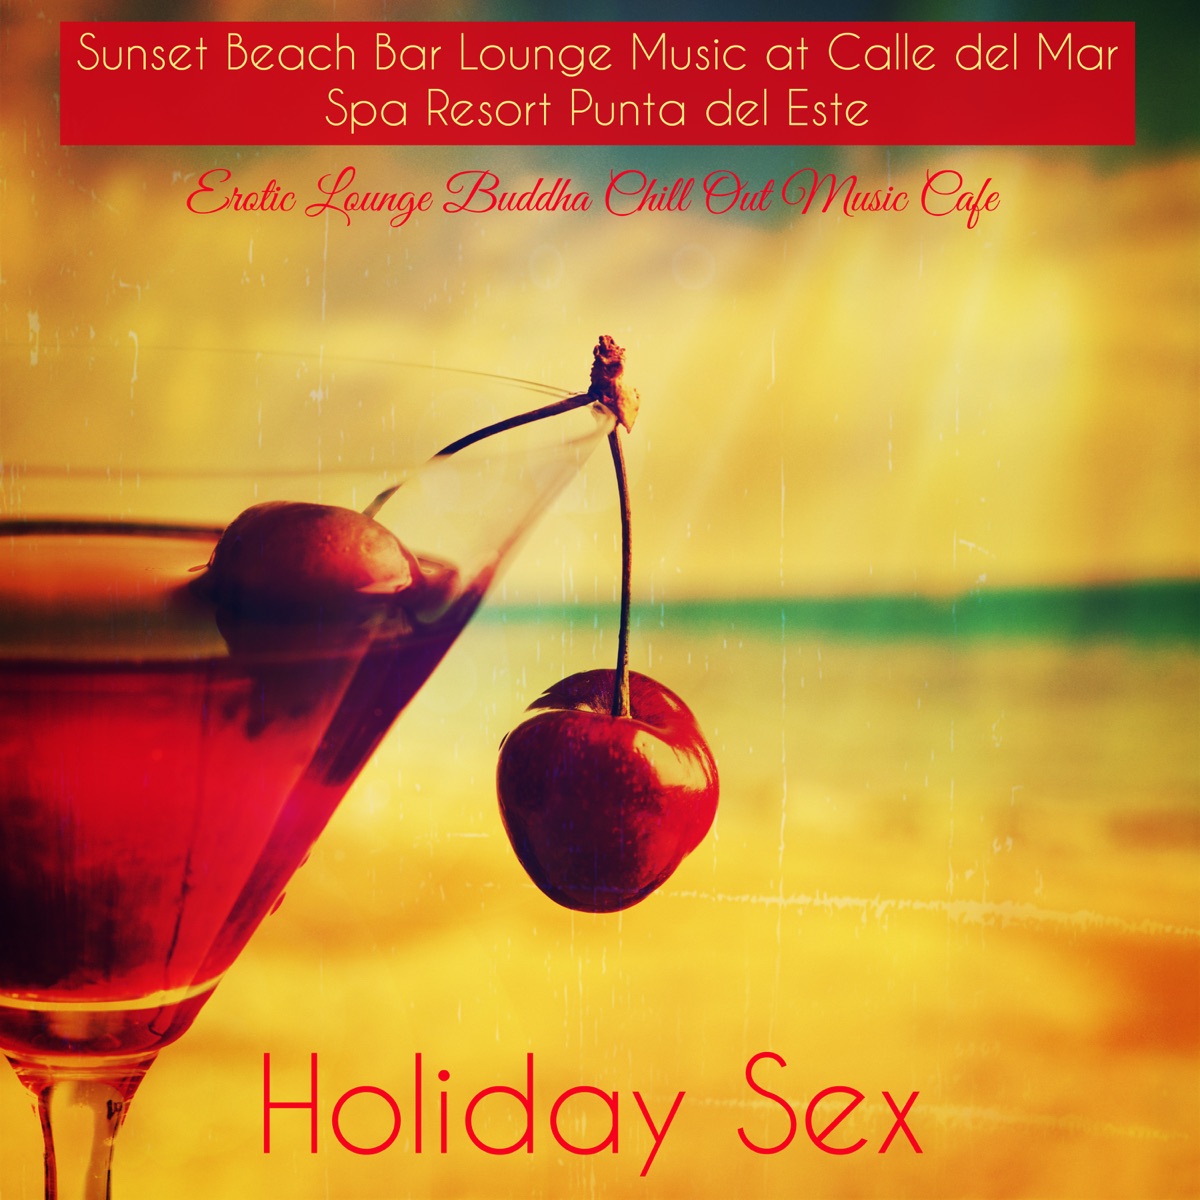 Swingers Club Smooth, Sensual and Erotic Background Music for Swingers Clubs - Album by Erotic Lounge Buddha Chill Out Music Cafe